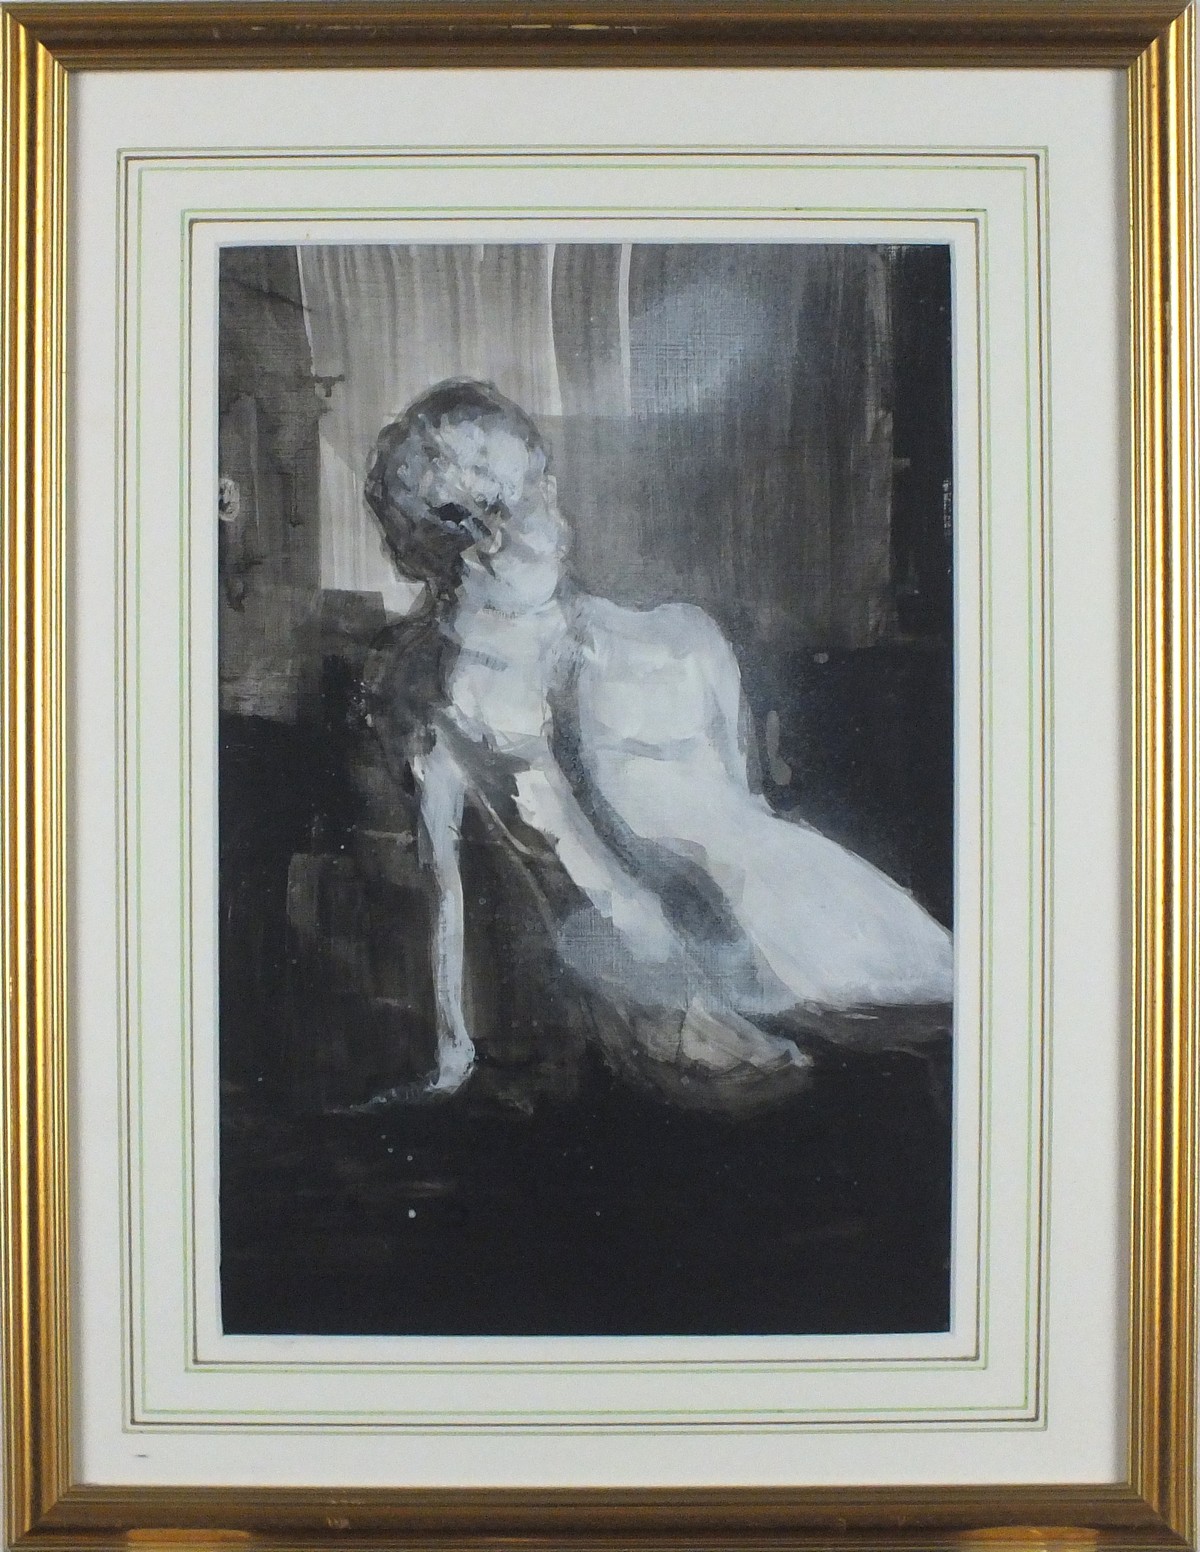 Paul MITCHELL (British b. 1974) Figures and Light - W3, Mixed media, Signed lower right, signed, - Image 5 of 6